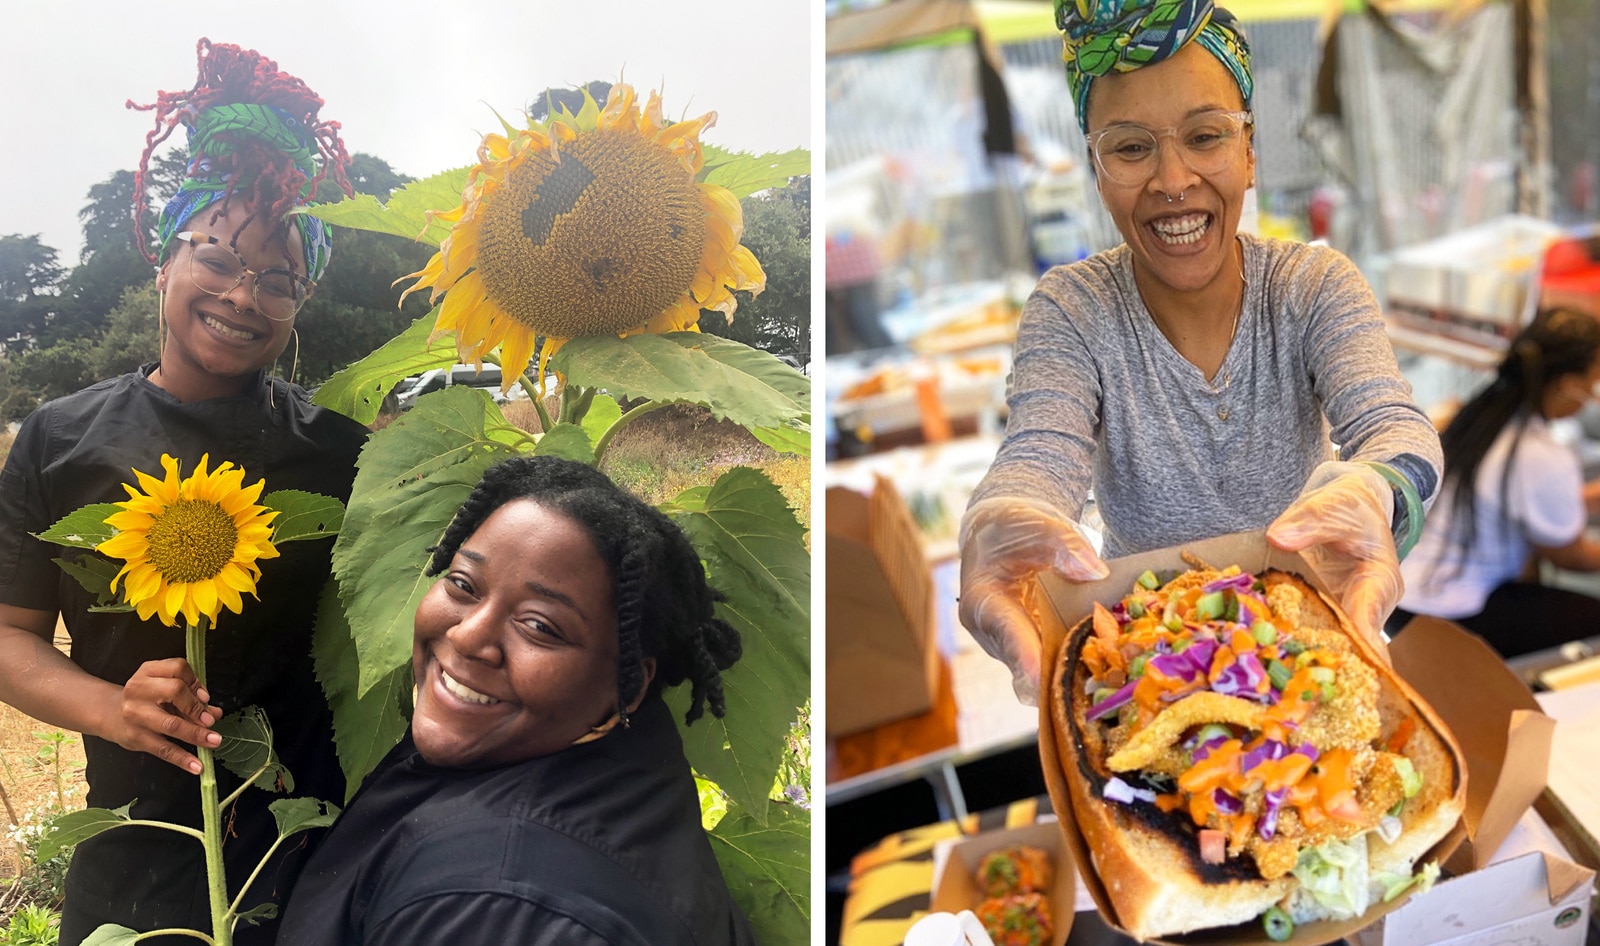 Black-Owned Vegan Catering Company Aims to Revolutionize “Hood Food” in San Francisco Bay Area